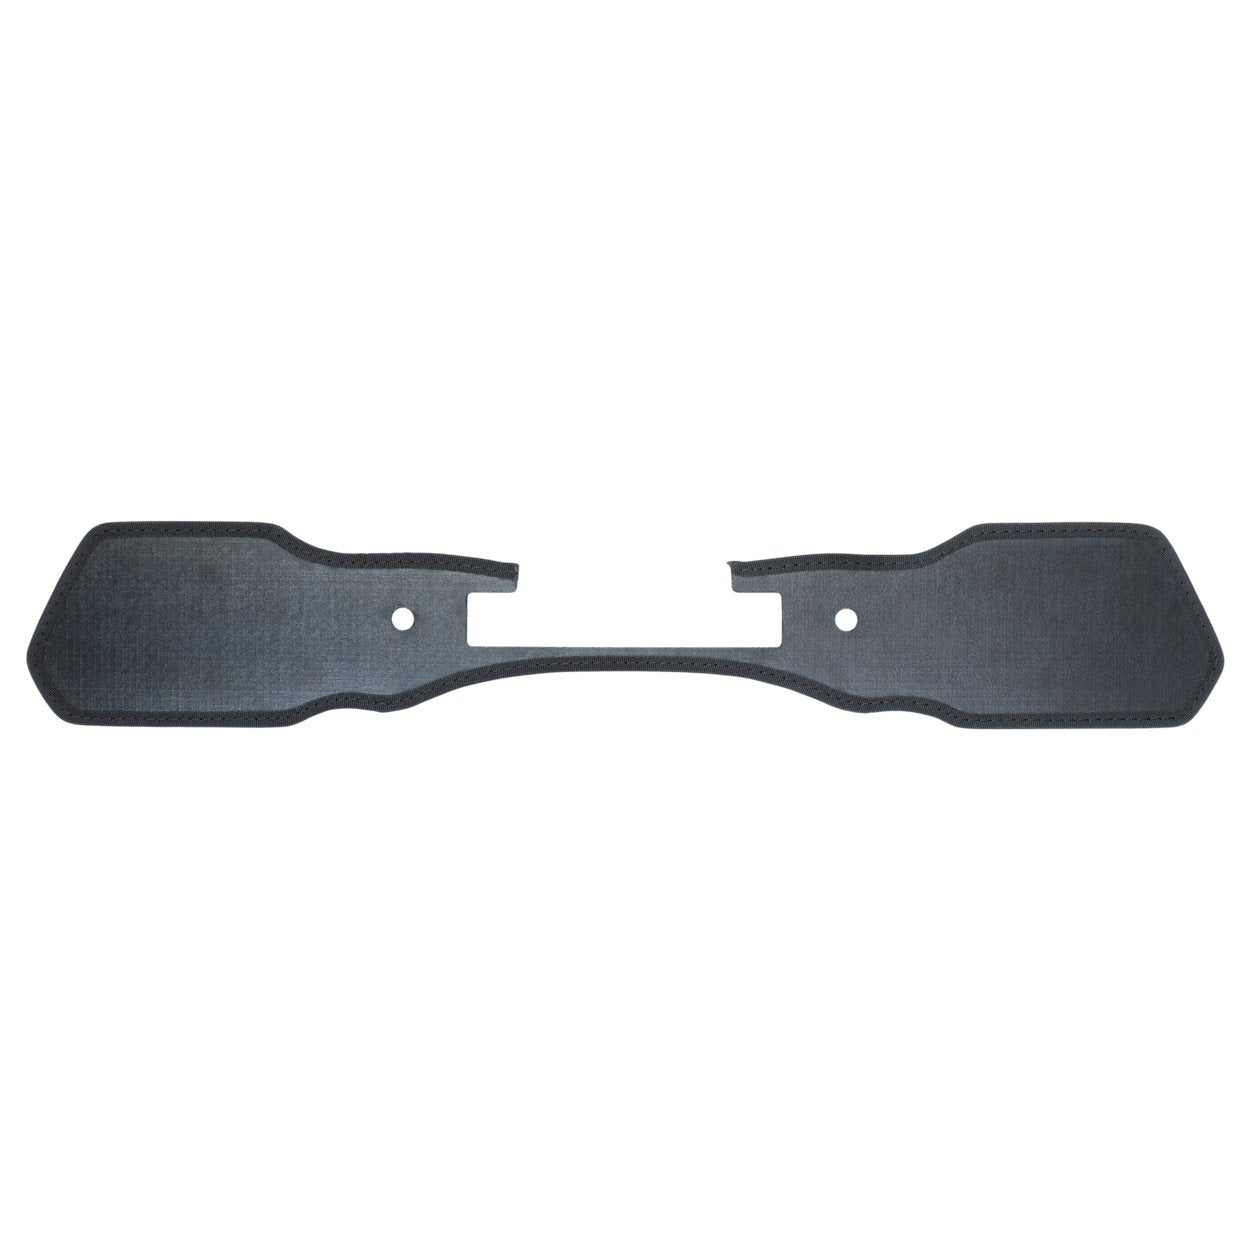 ION Flaps Spectre-Bar (SS21 onwards) 2022 - Worthing Watersports - 9010583014876 - Spareparts - ION Water